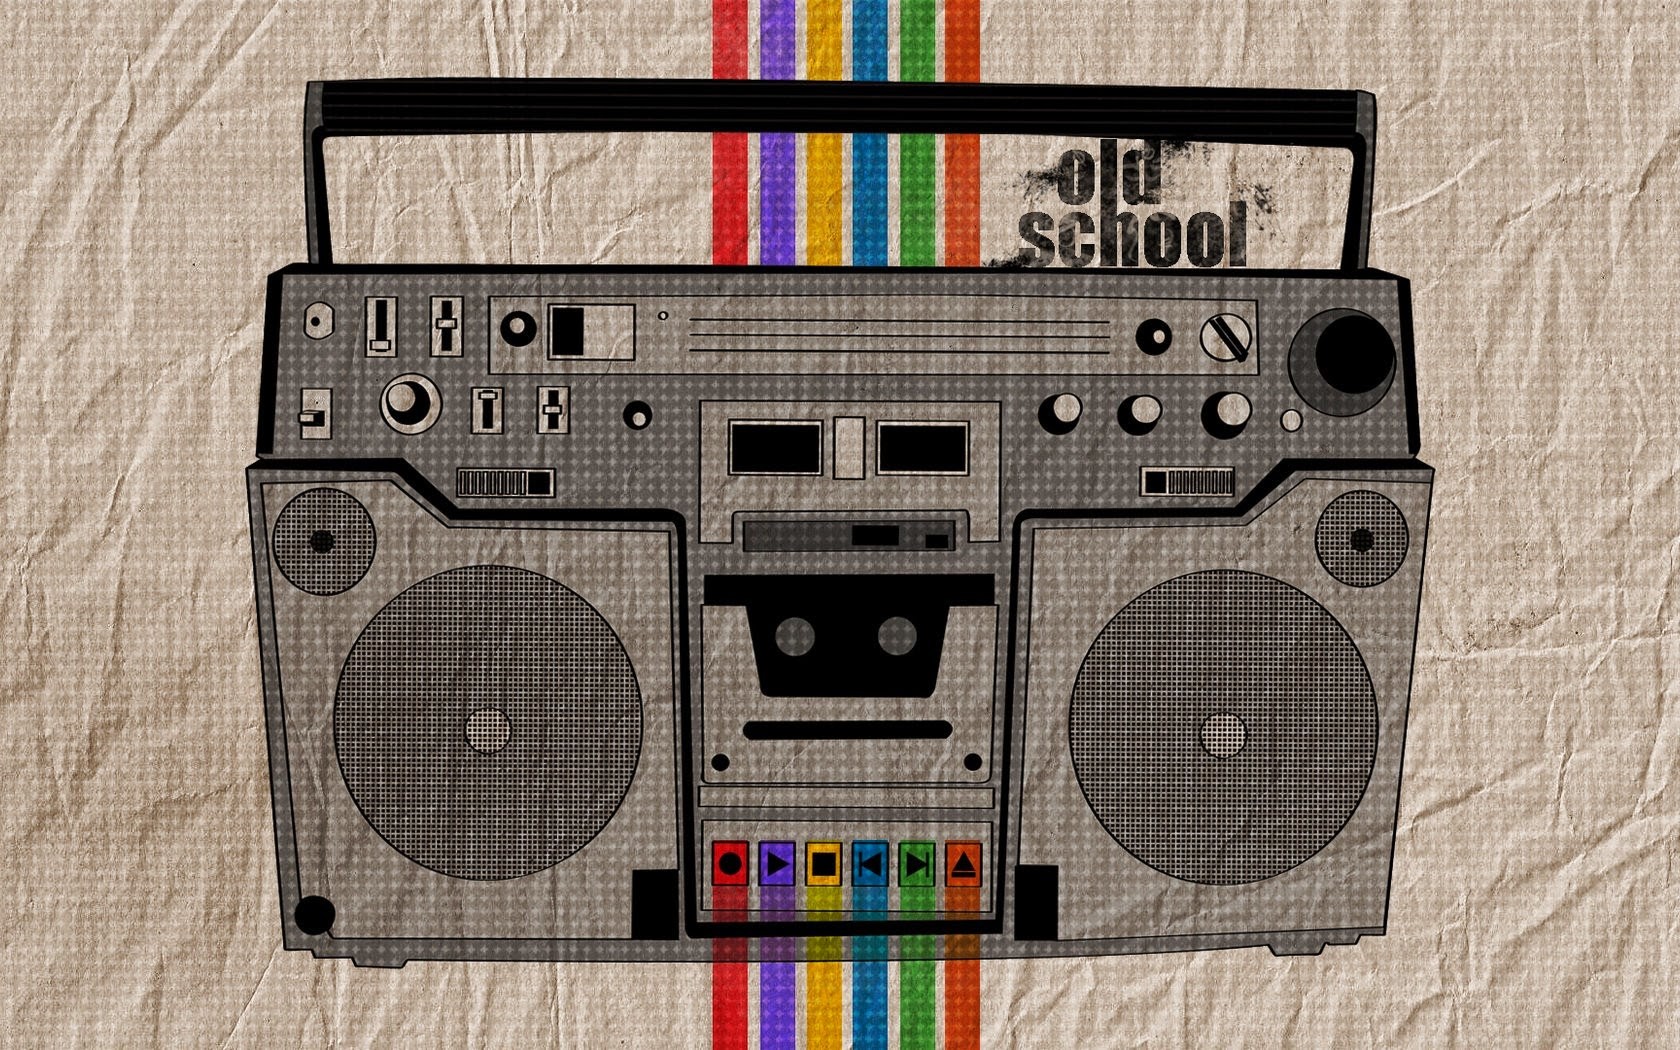 General 1680x1050 boombox music stereos lines beige artwork text paper wrinkled paper selective coloring